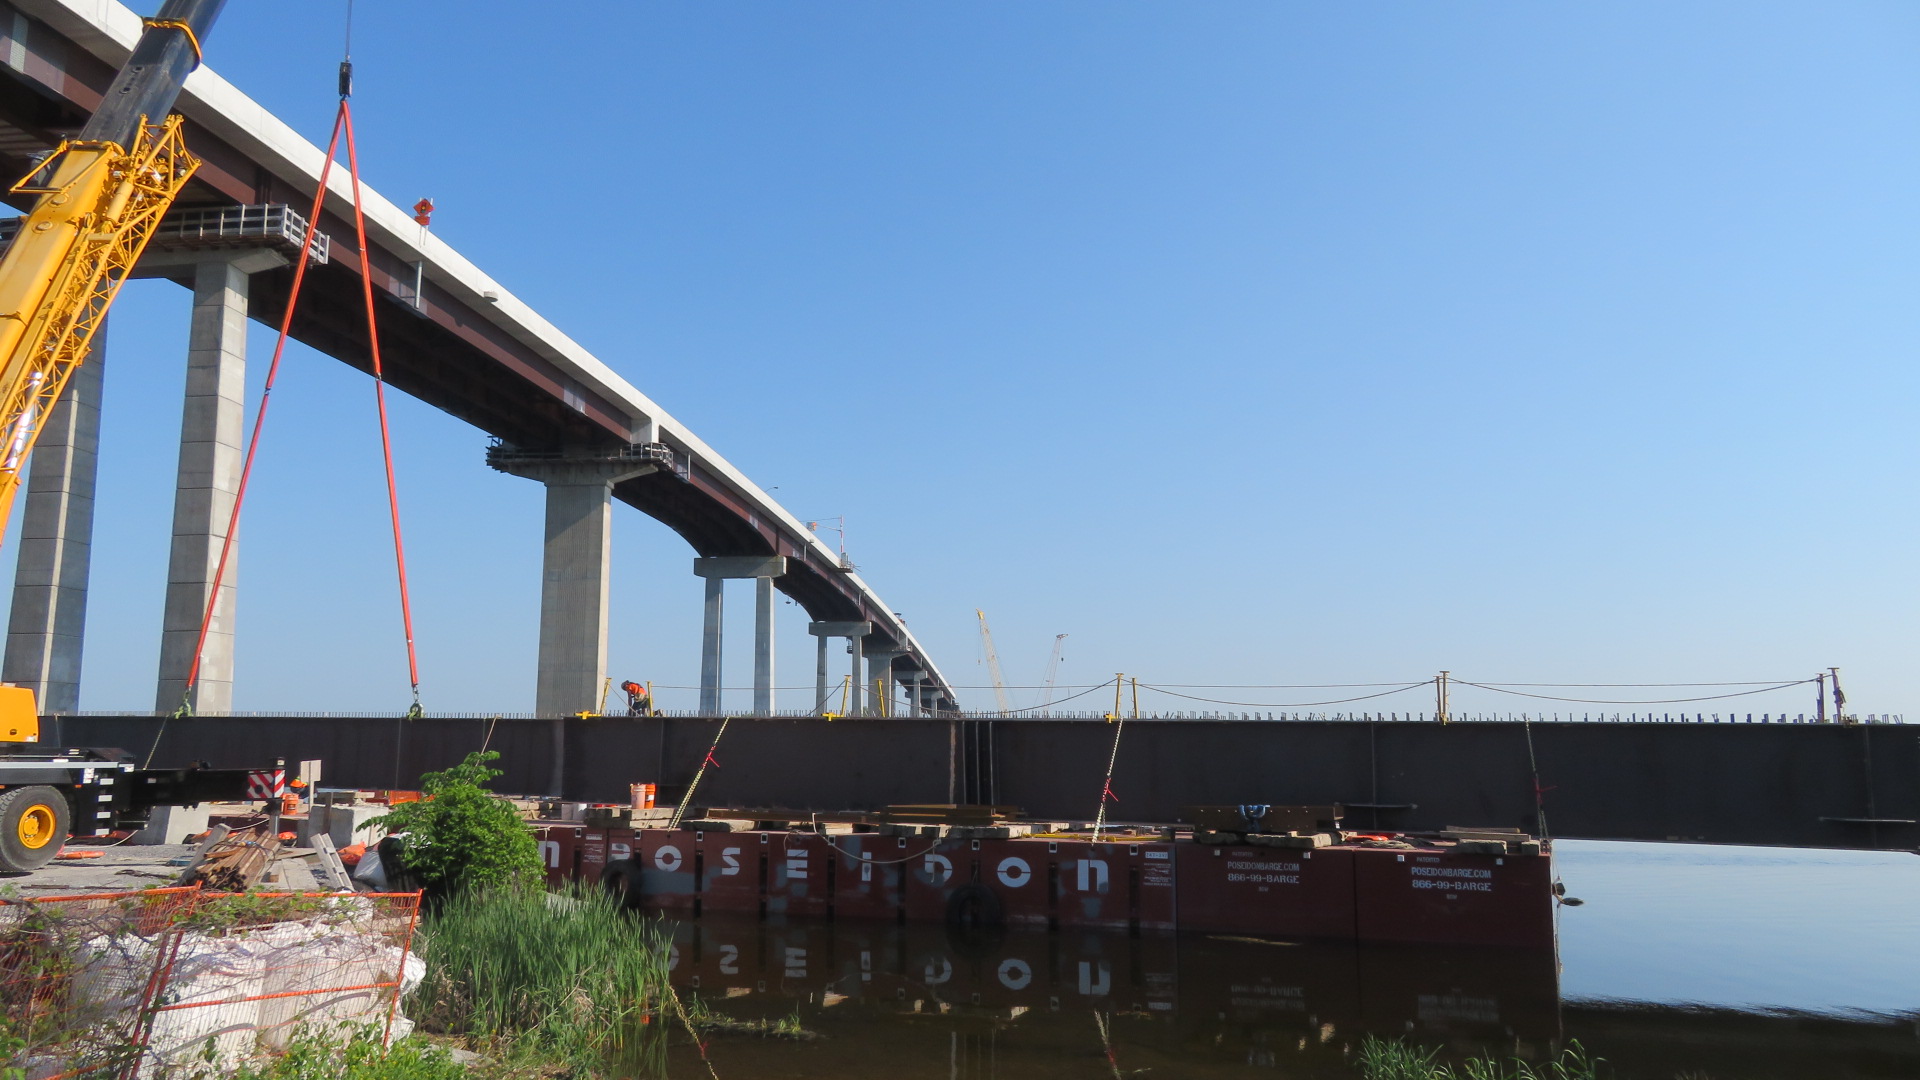 Assembling the girders on the barge